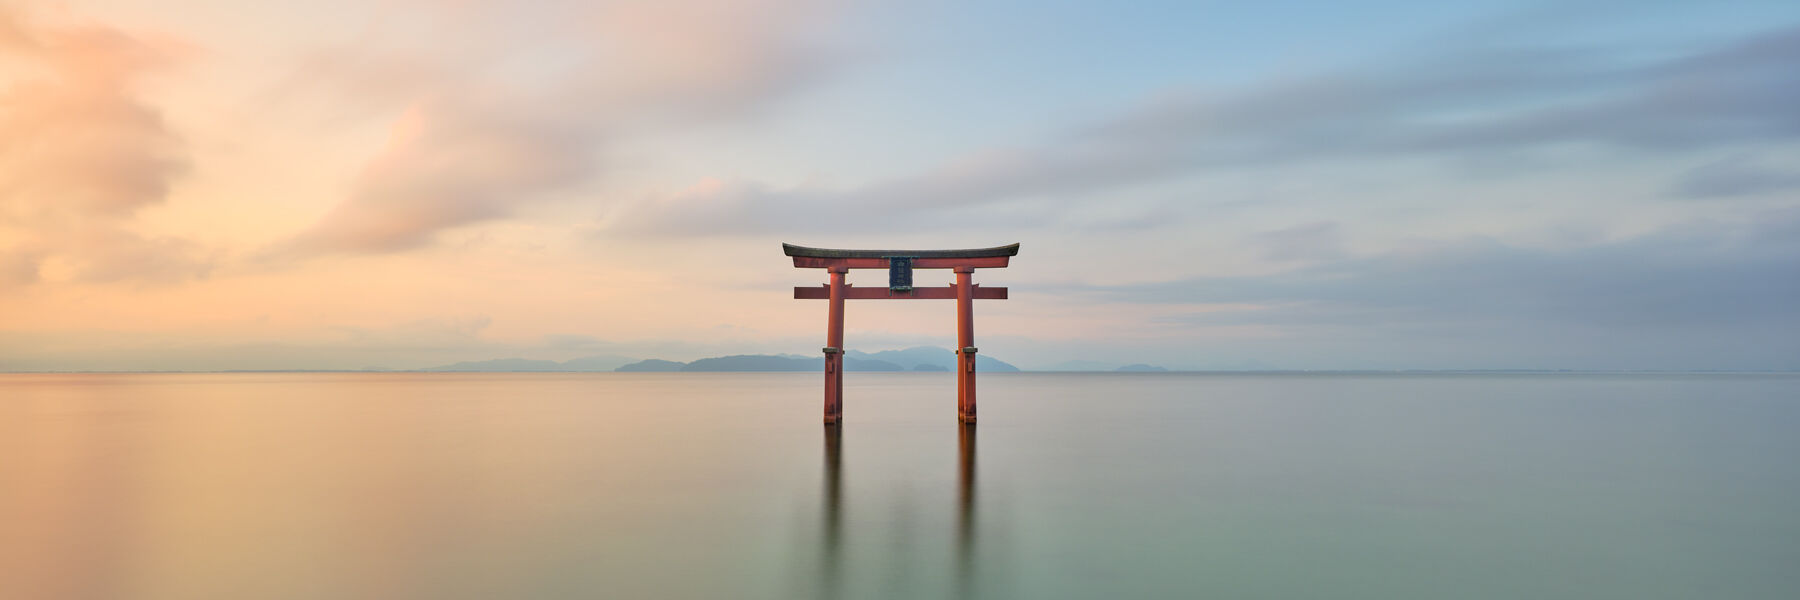 a beautiful long exposure photograph of a red/orange torii gate at the Shirahige Shrine  at sunrise on Lake Biwa in Japan.  Photograph by Andrew Shoemaker